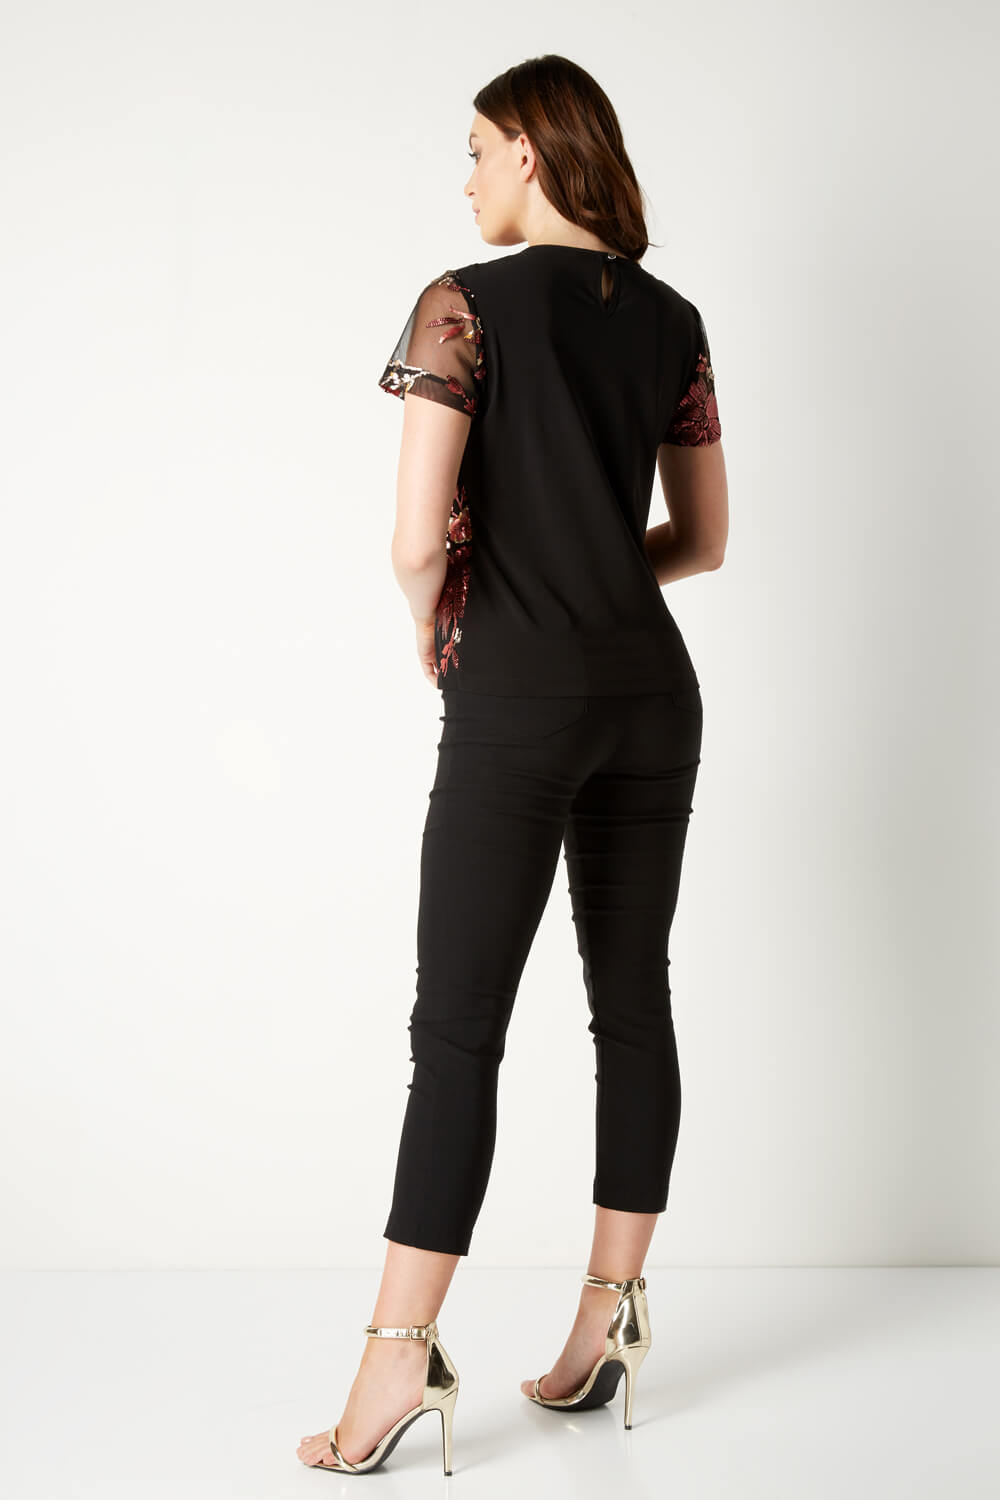 Black Floral Mesh Embroidered Top, Image 3 of 5